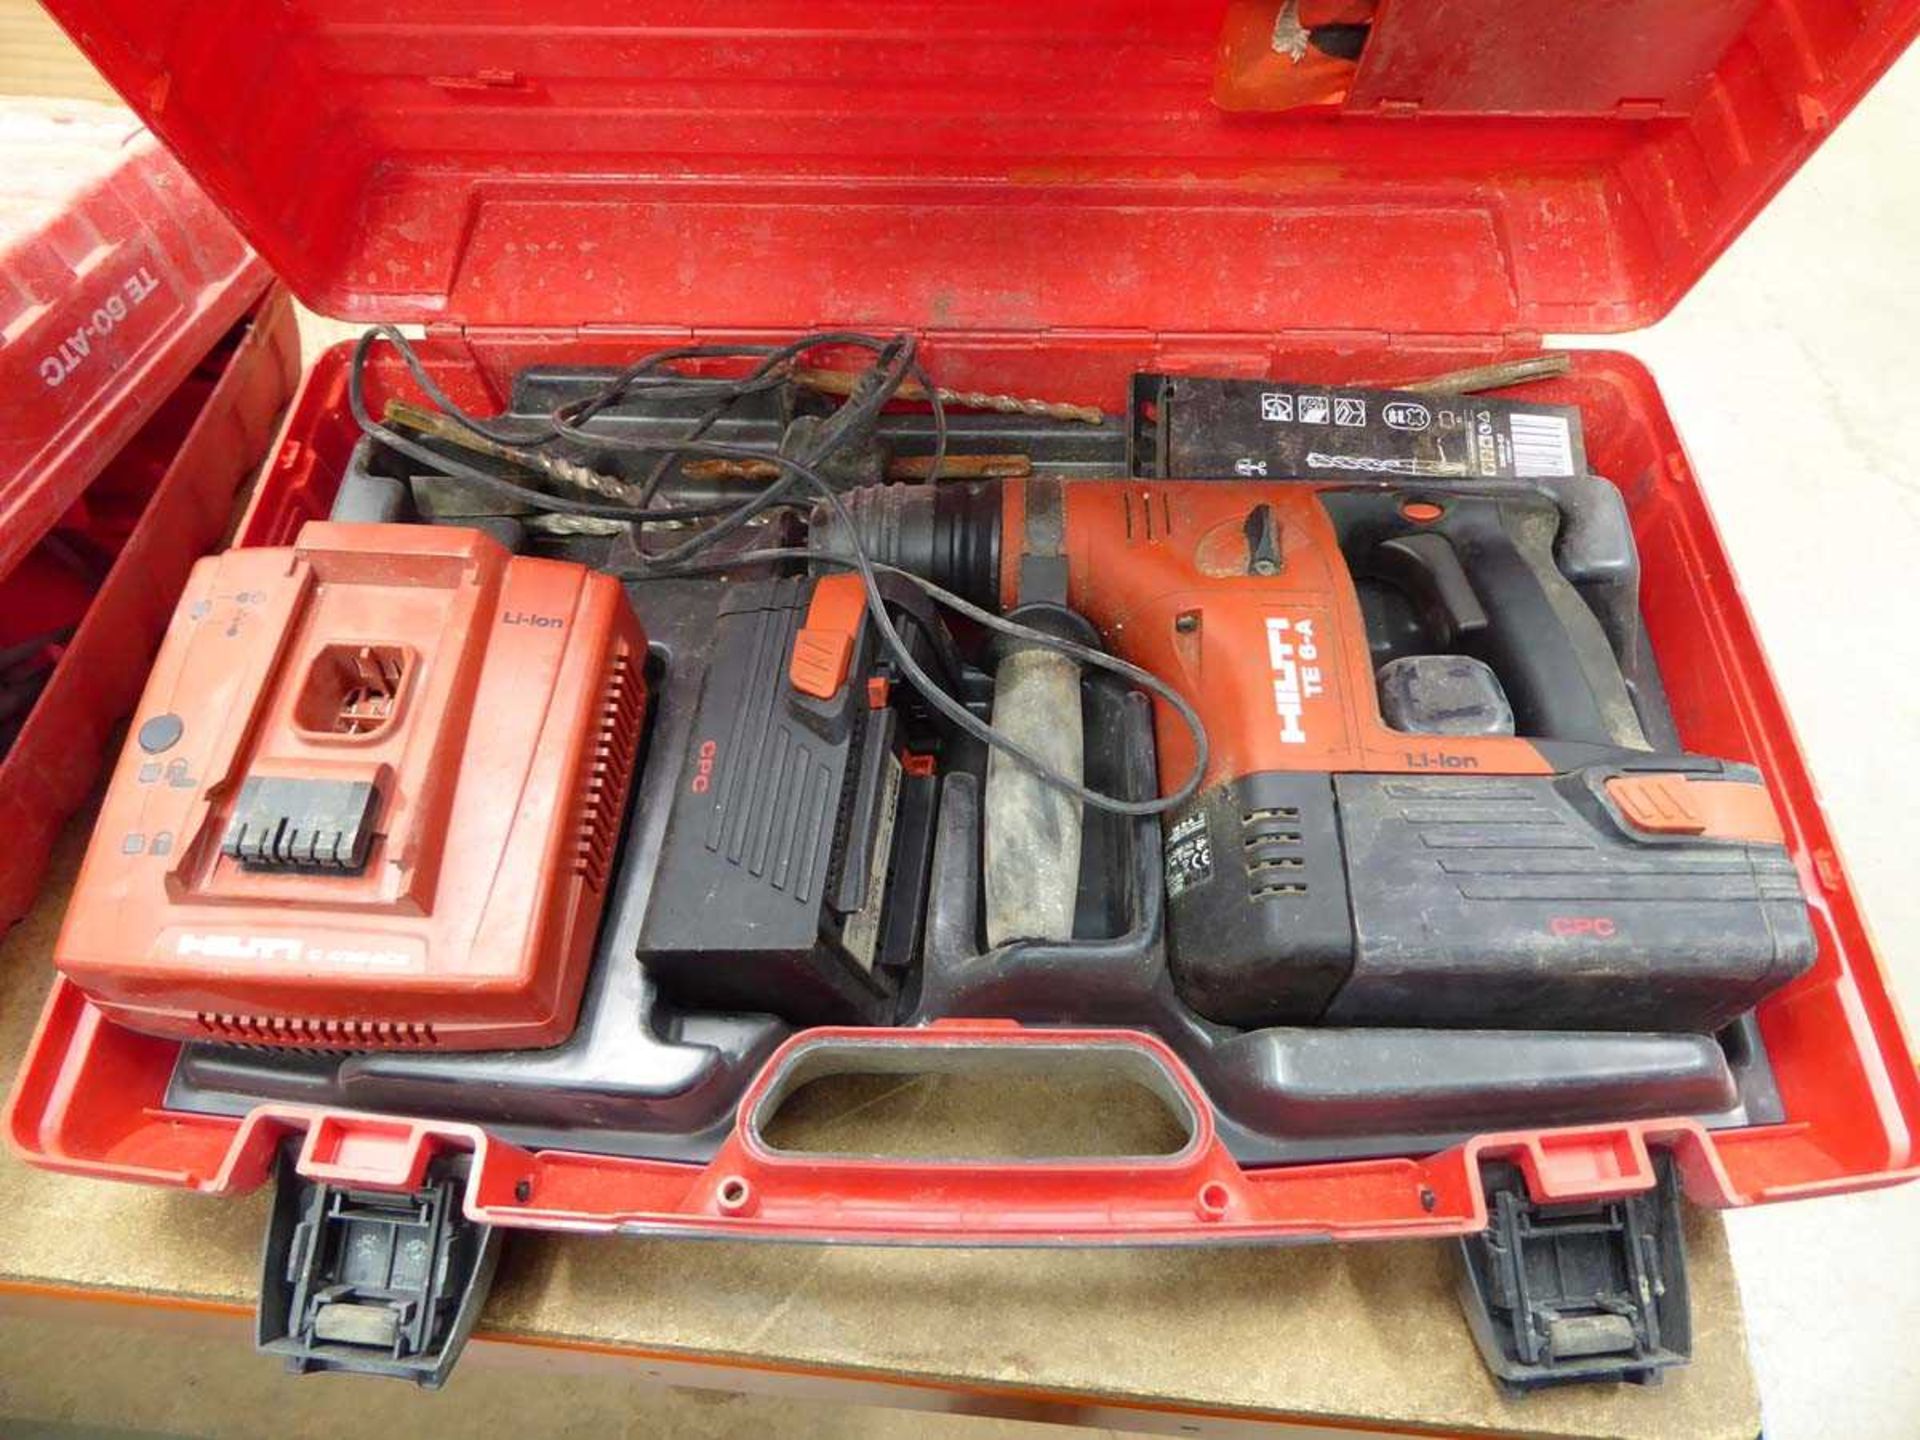 Hilti TE6A battery powered drill with 2 batteries and charger